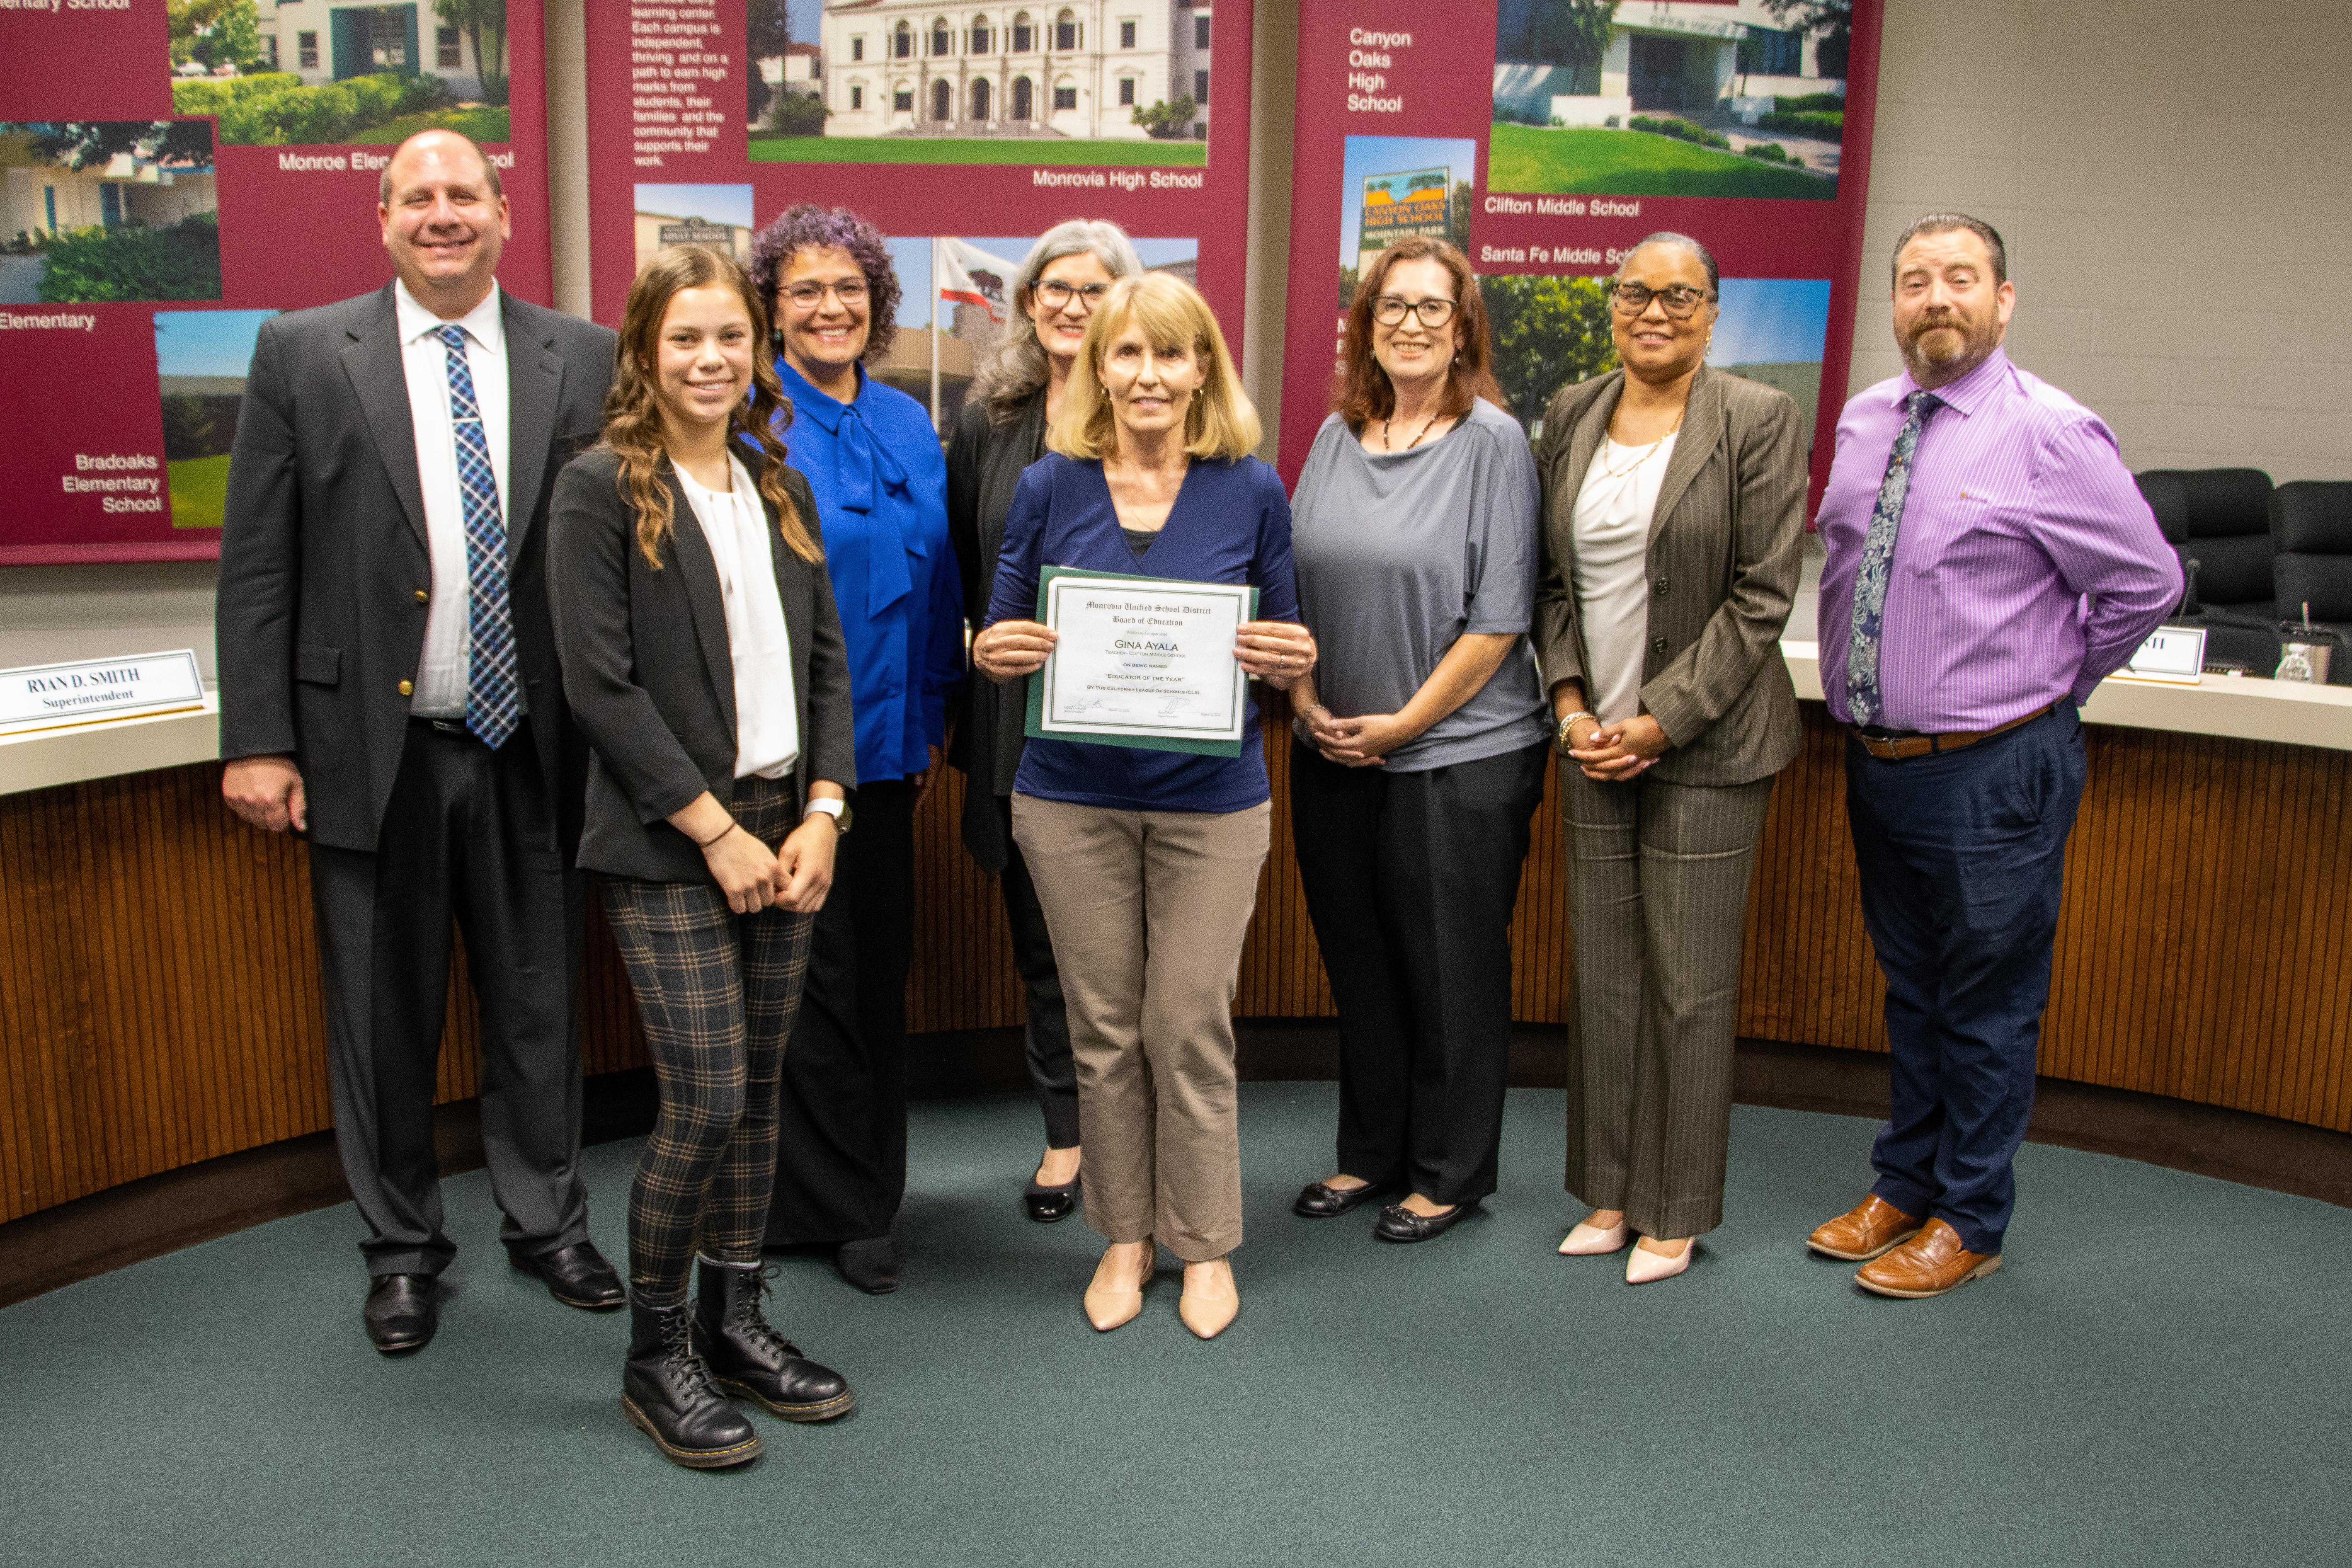 To close out recognitions, The Board of Education congratulated Clifton Middle School teacher Gina Ayala on being named the California League of Schools (CLS) State "Middle School Educator of the Year."